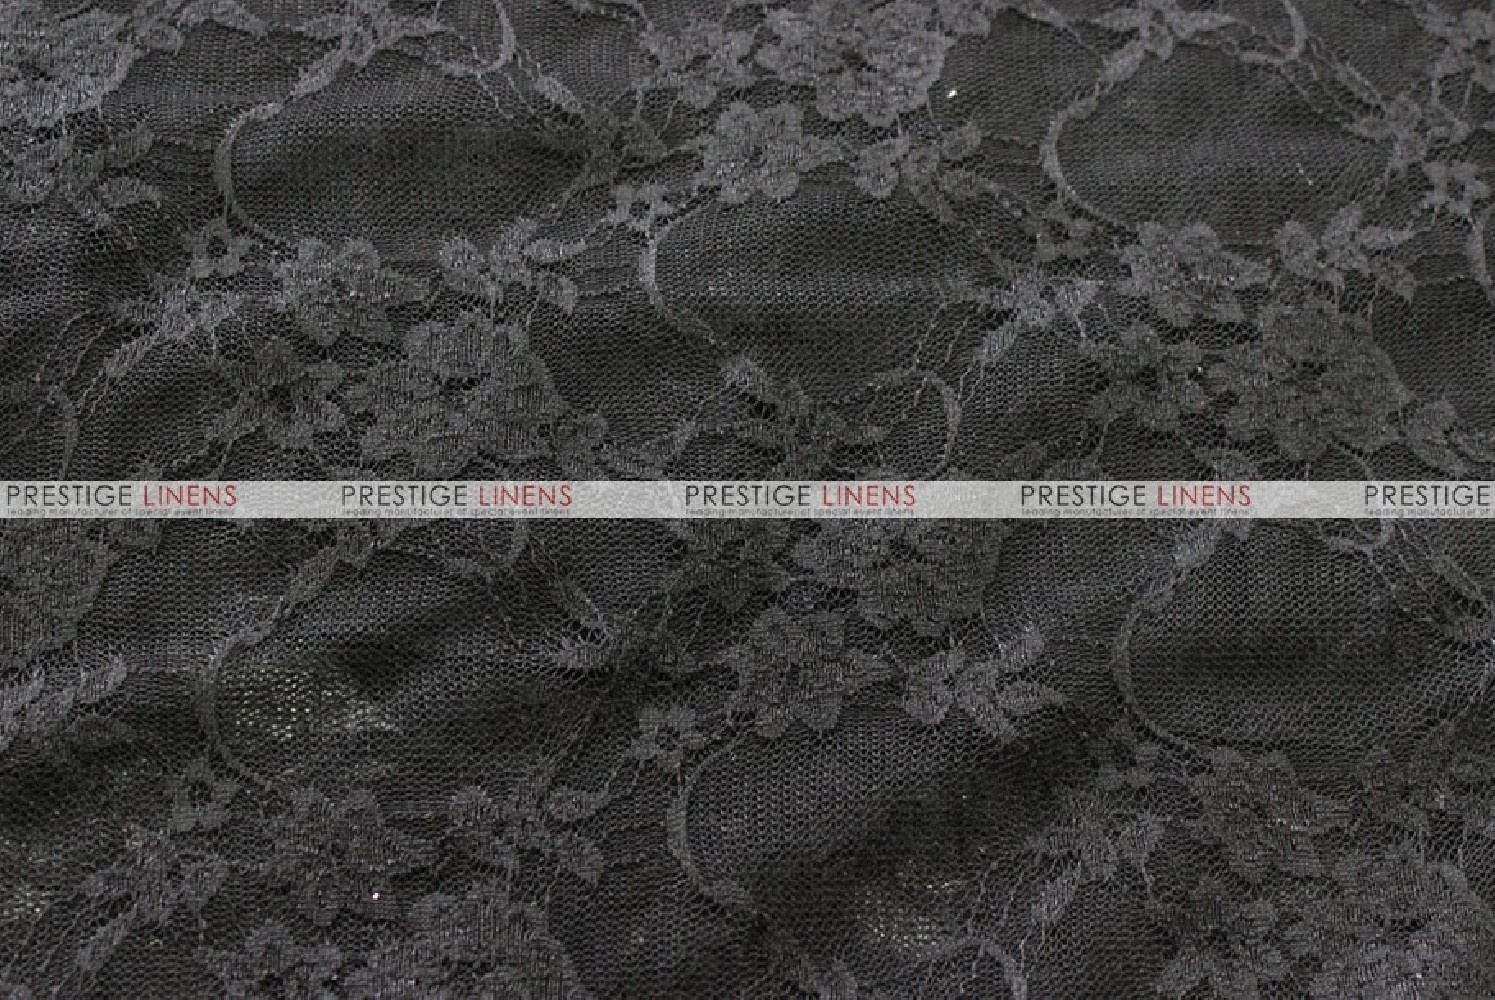 Black Stretch Lace Fabric - by The Yard